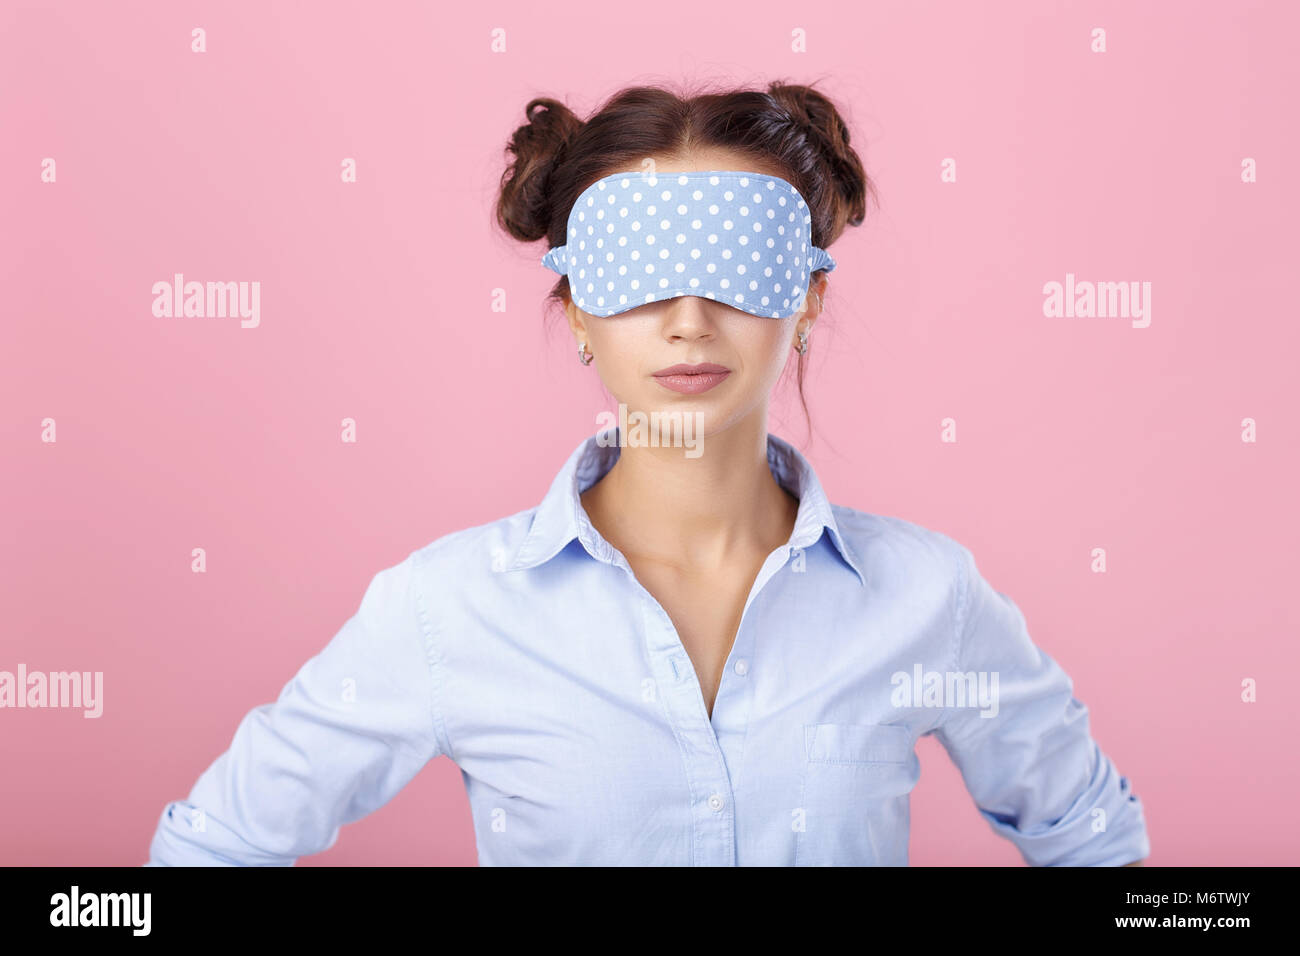 A Young Girl, in a Bra and a Sleeping Mask, Holds a Bottle of Alcohol and  Looks at it. on a Red Background. Stock Photo - Image of excitement,  breast: 106671990